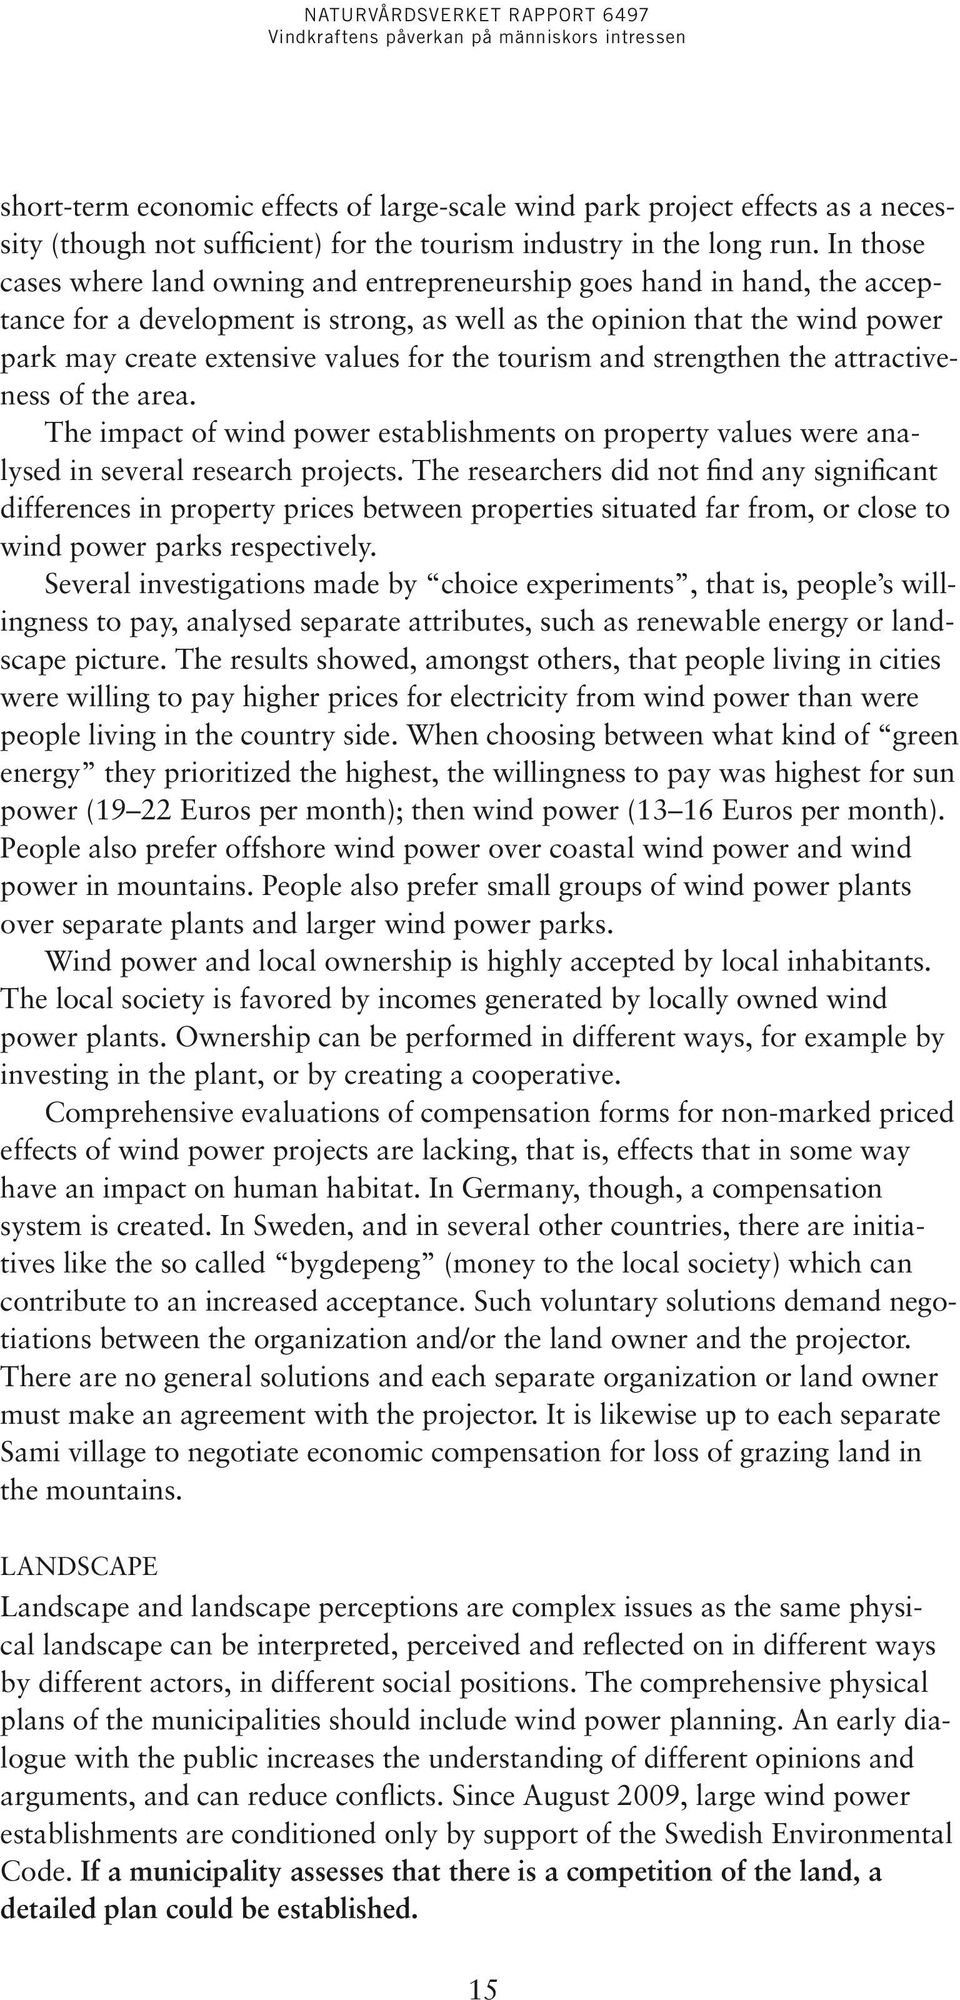 the tourism and strengthen the attractiveness of the area. The impact of wind power establishments on property values were analysed in several research projects.